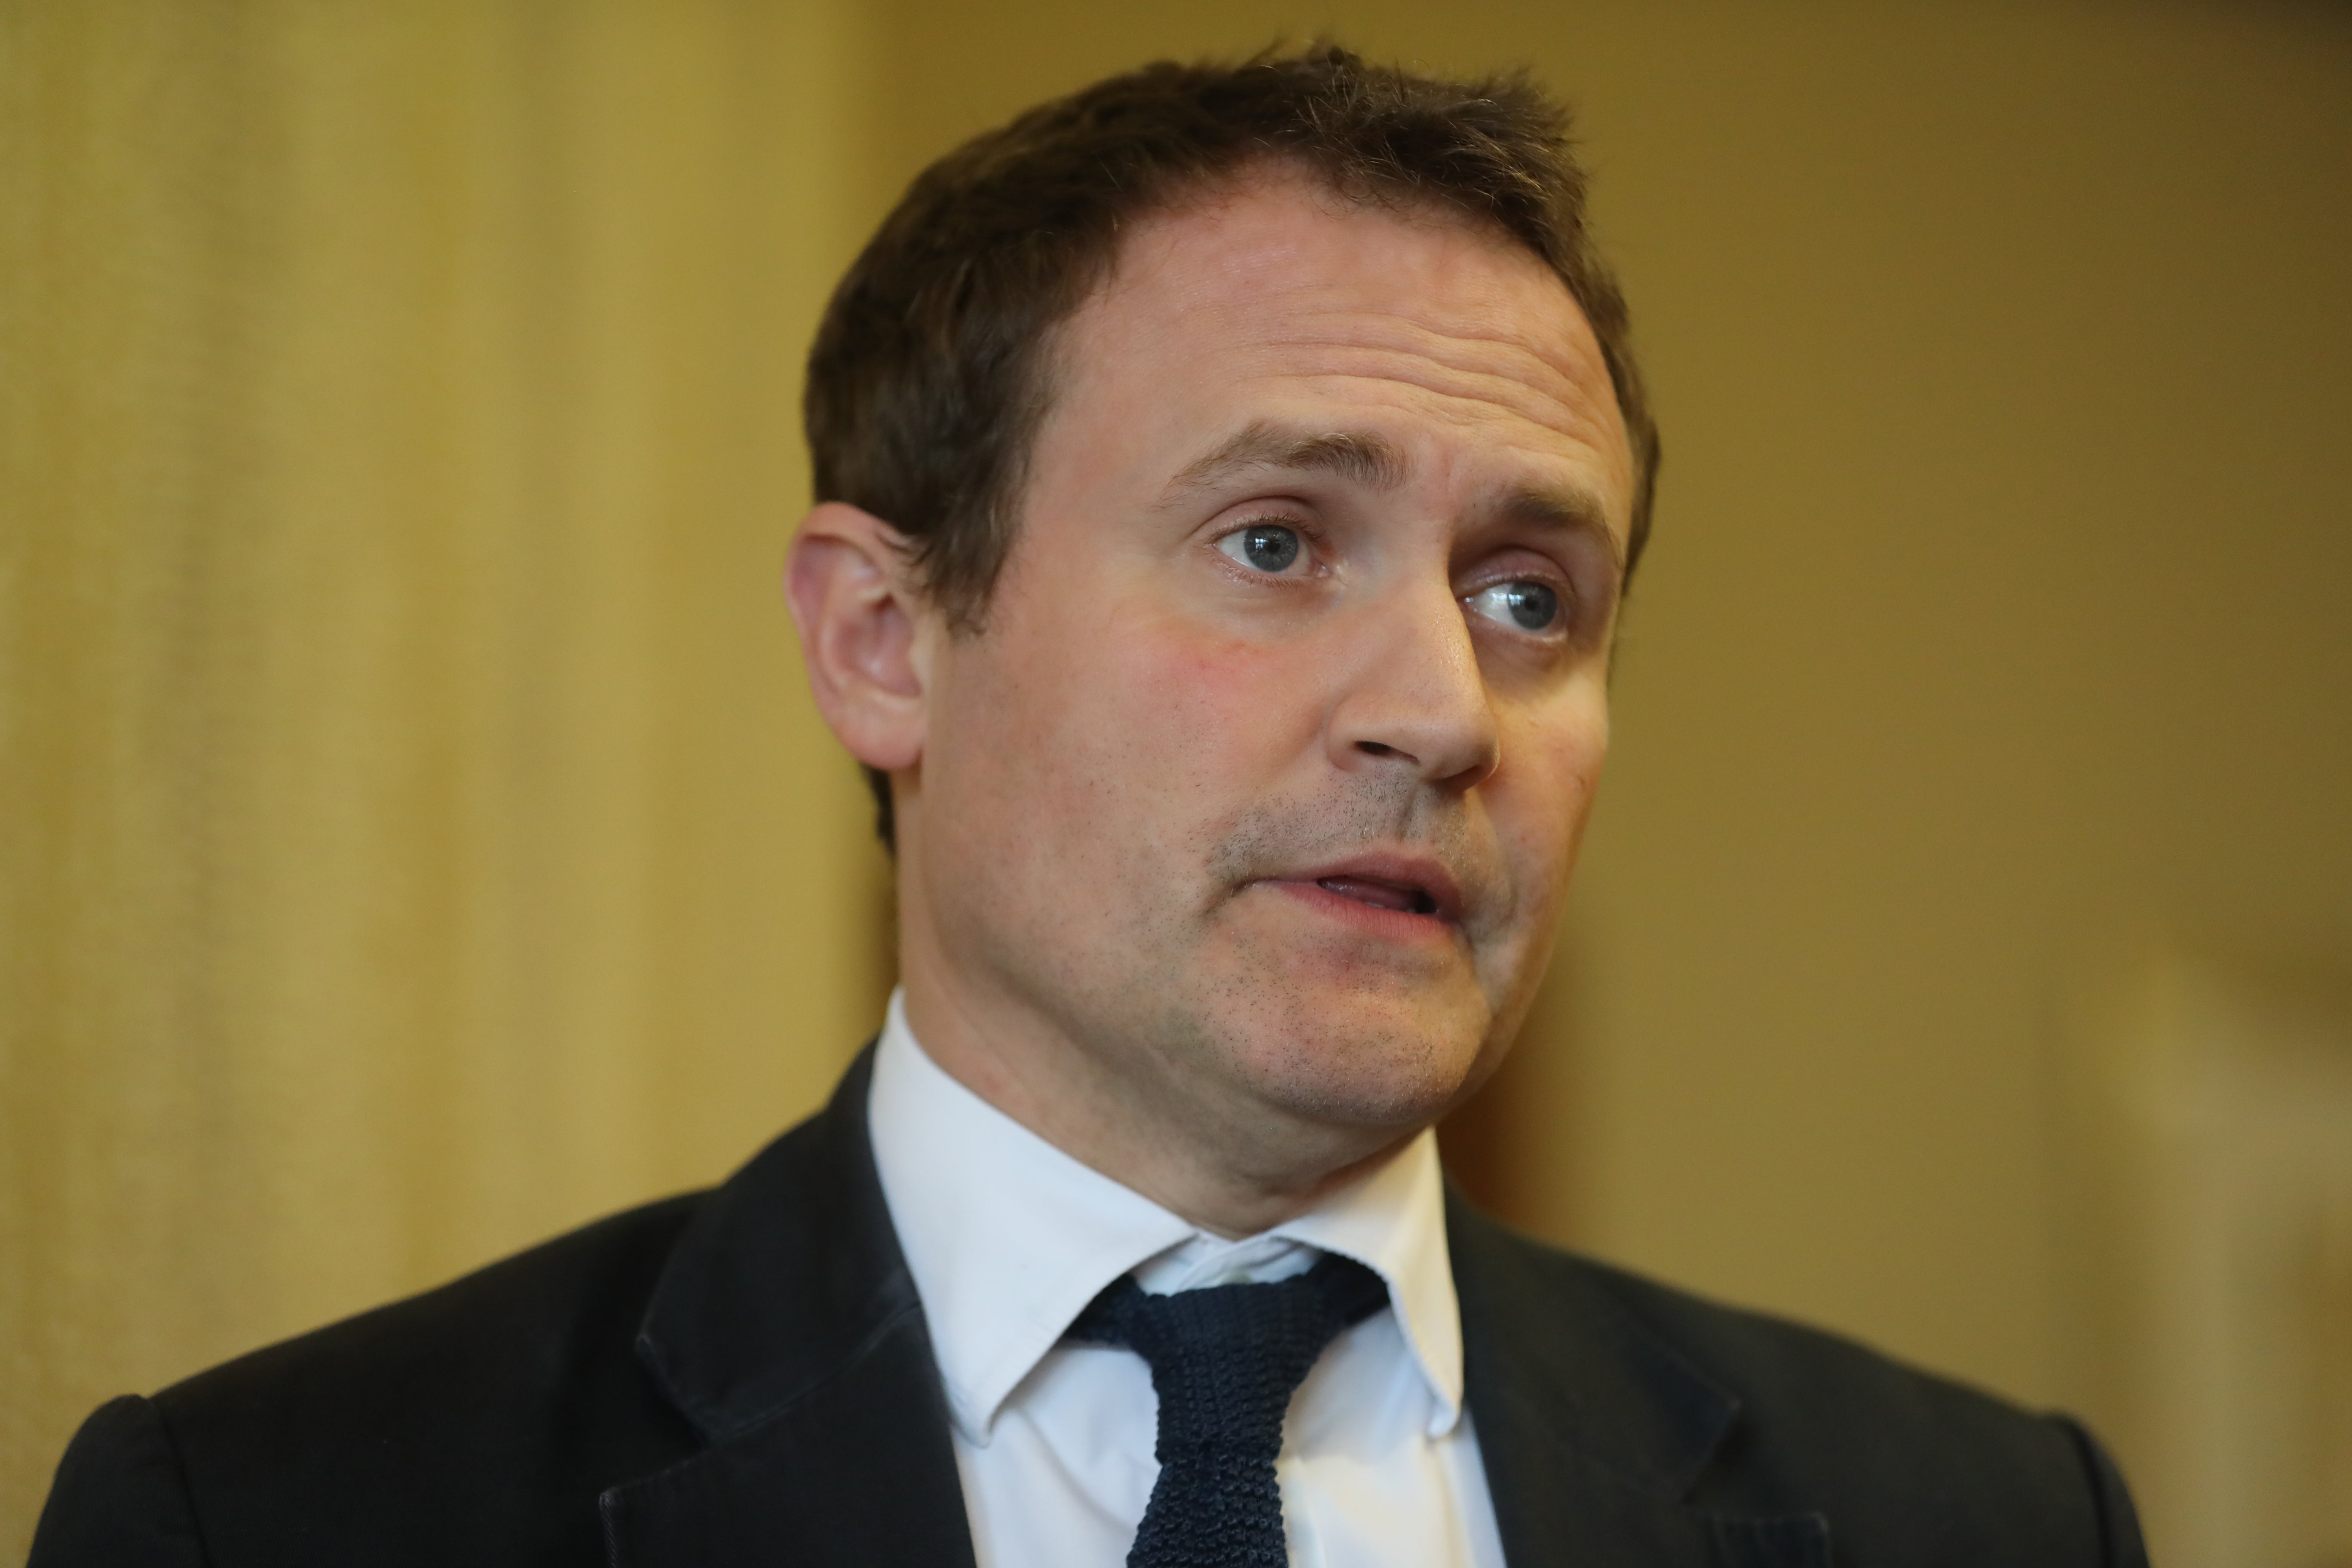 Tom Tugendhat is hoping to pick up more support as the field narrows